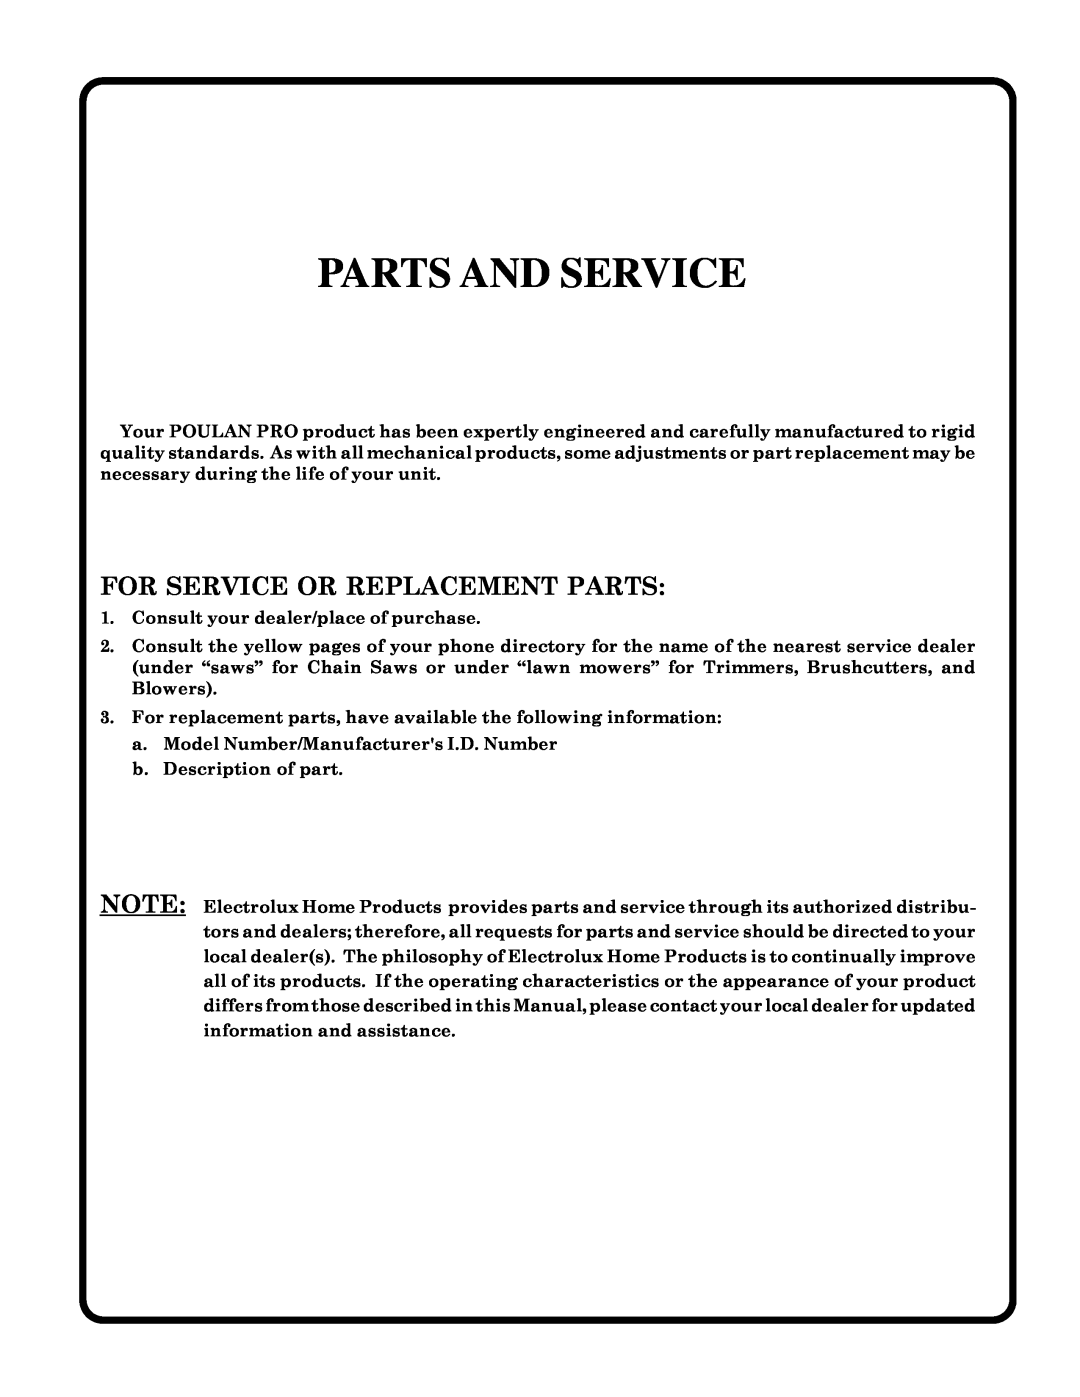 Poulan 180198 owner manual Parts And Service, For Service Or Replacement Parts 